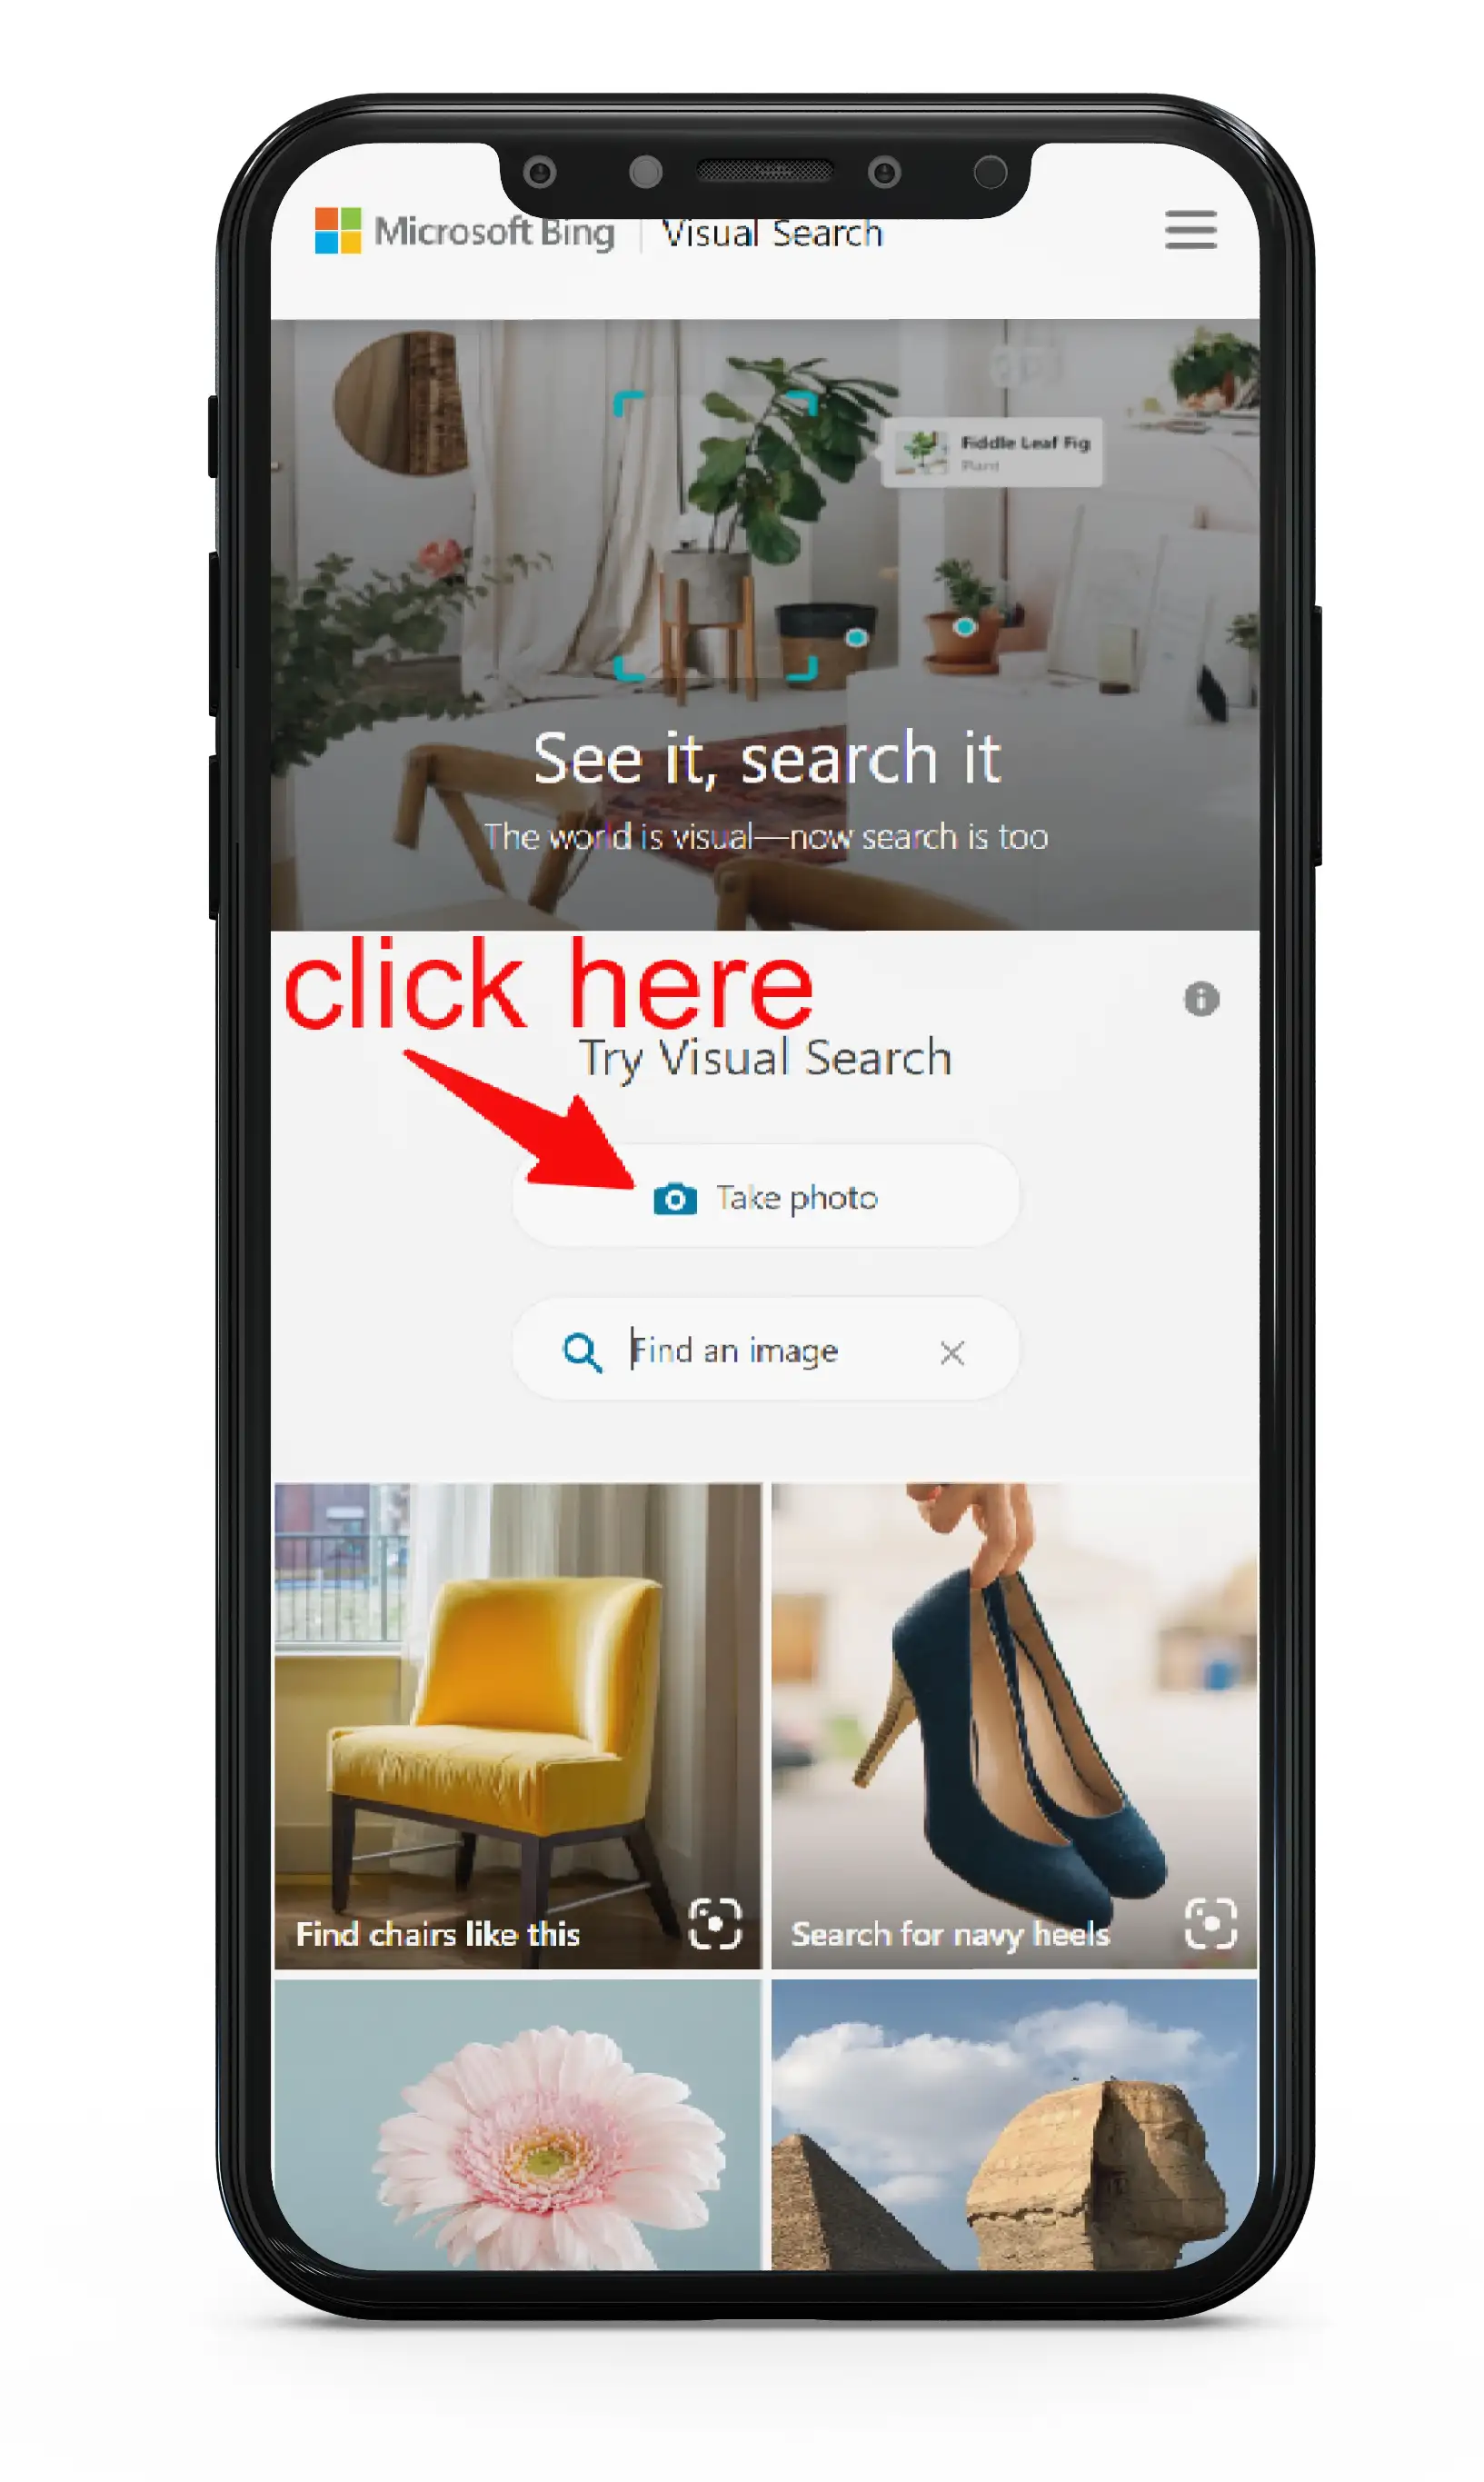 Bing Images Reverse Image Search on Mobile